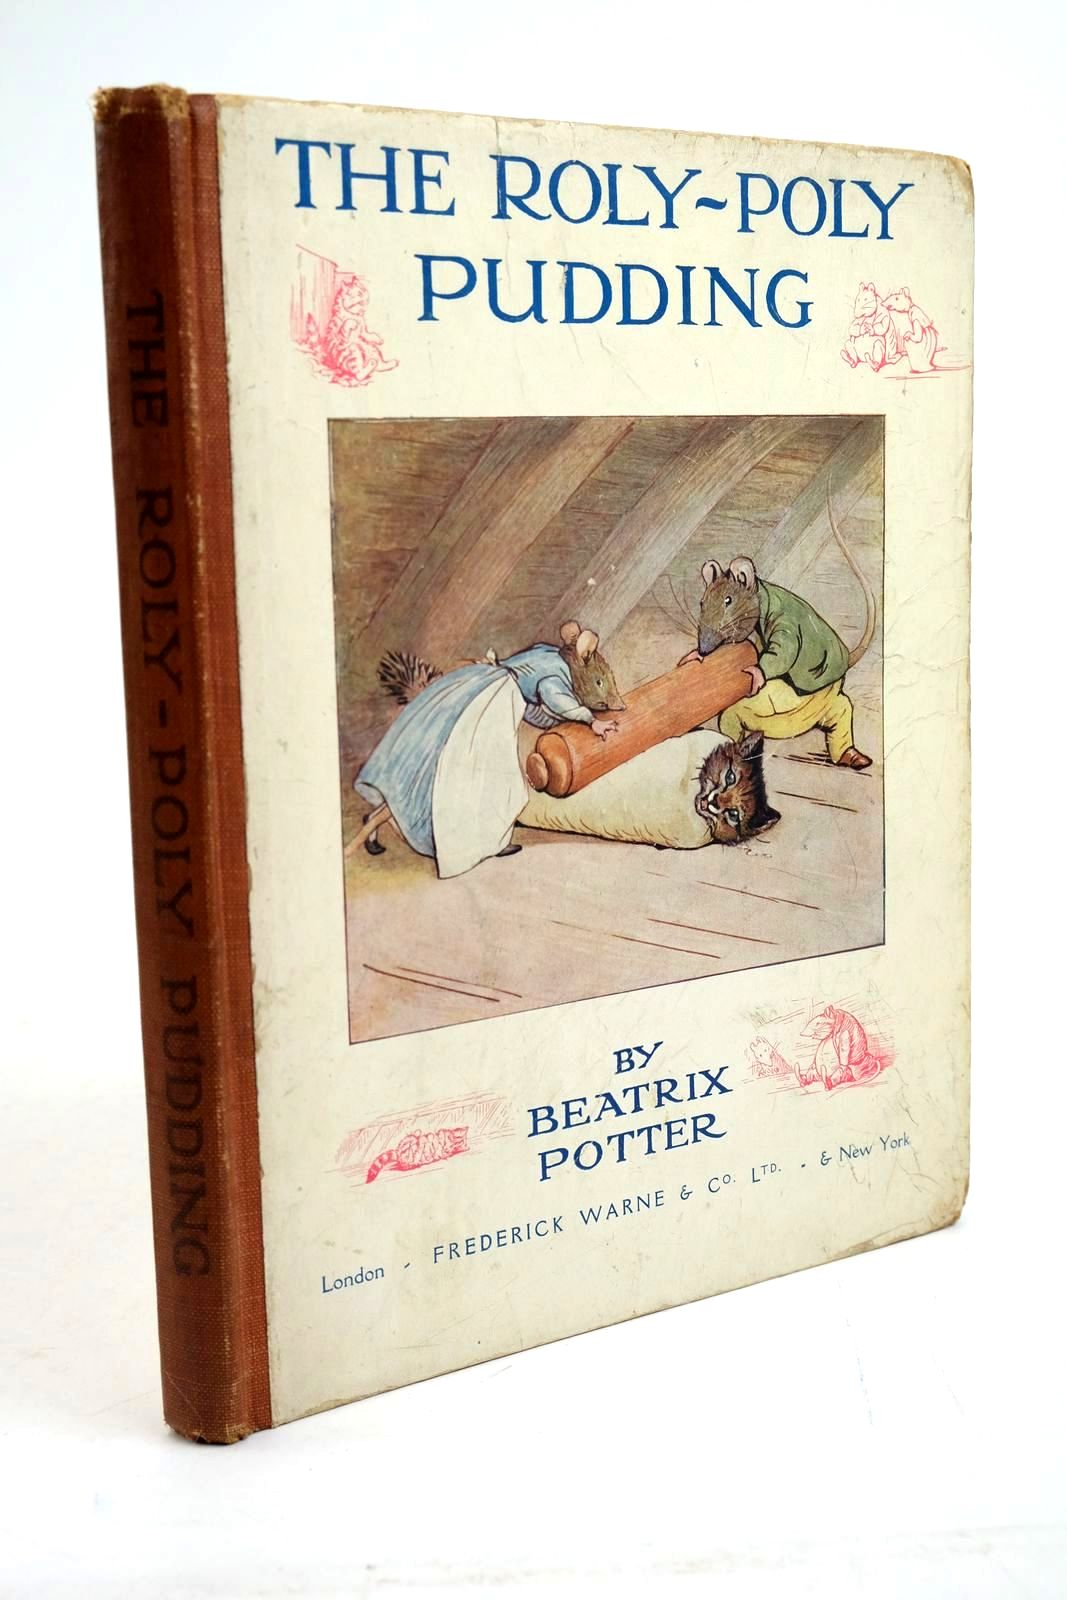 Photo of THE ROLY-POLY PUDDING written by Potter, Beatrix illustrated by Potter, Beatrix published by Frederick Warne & Co Ltd. (STOCK CODE: 1321642)  for sale by Stella & Rose's Books